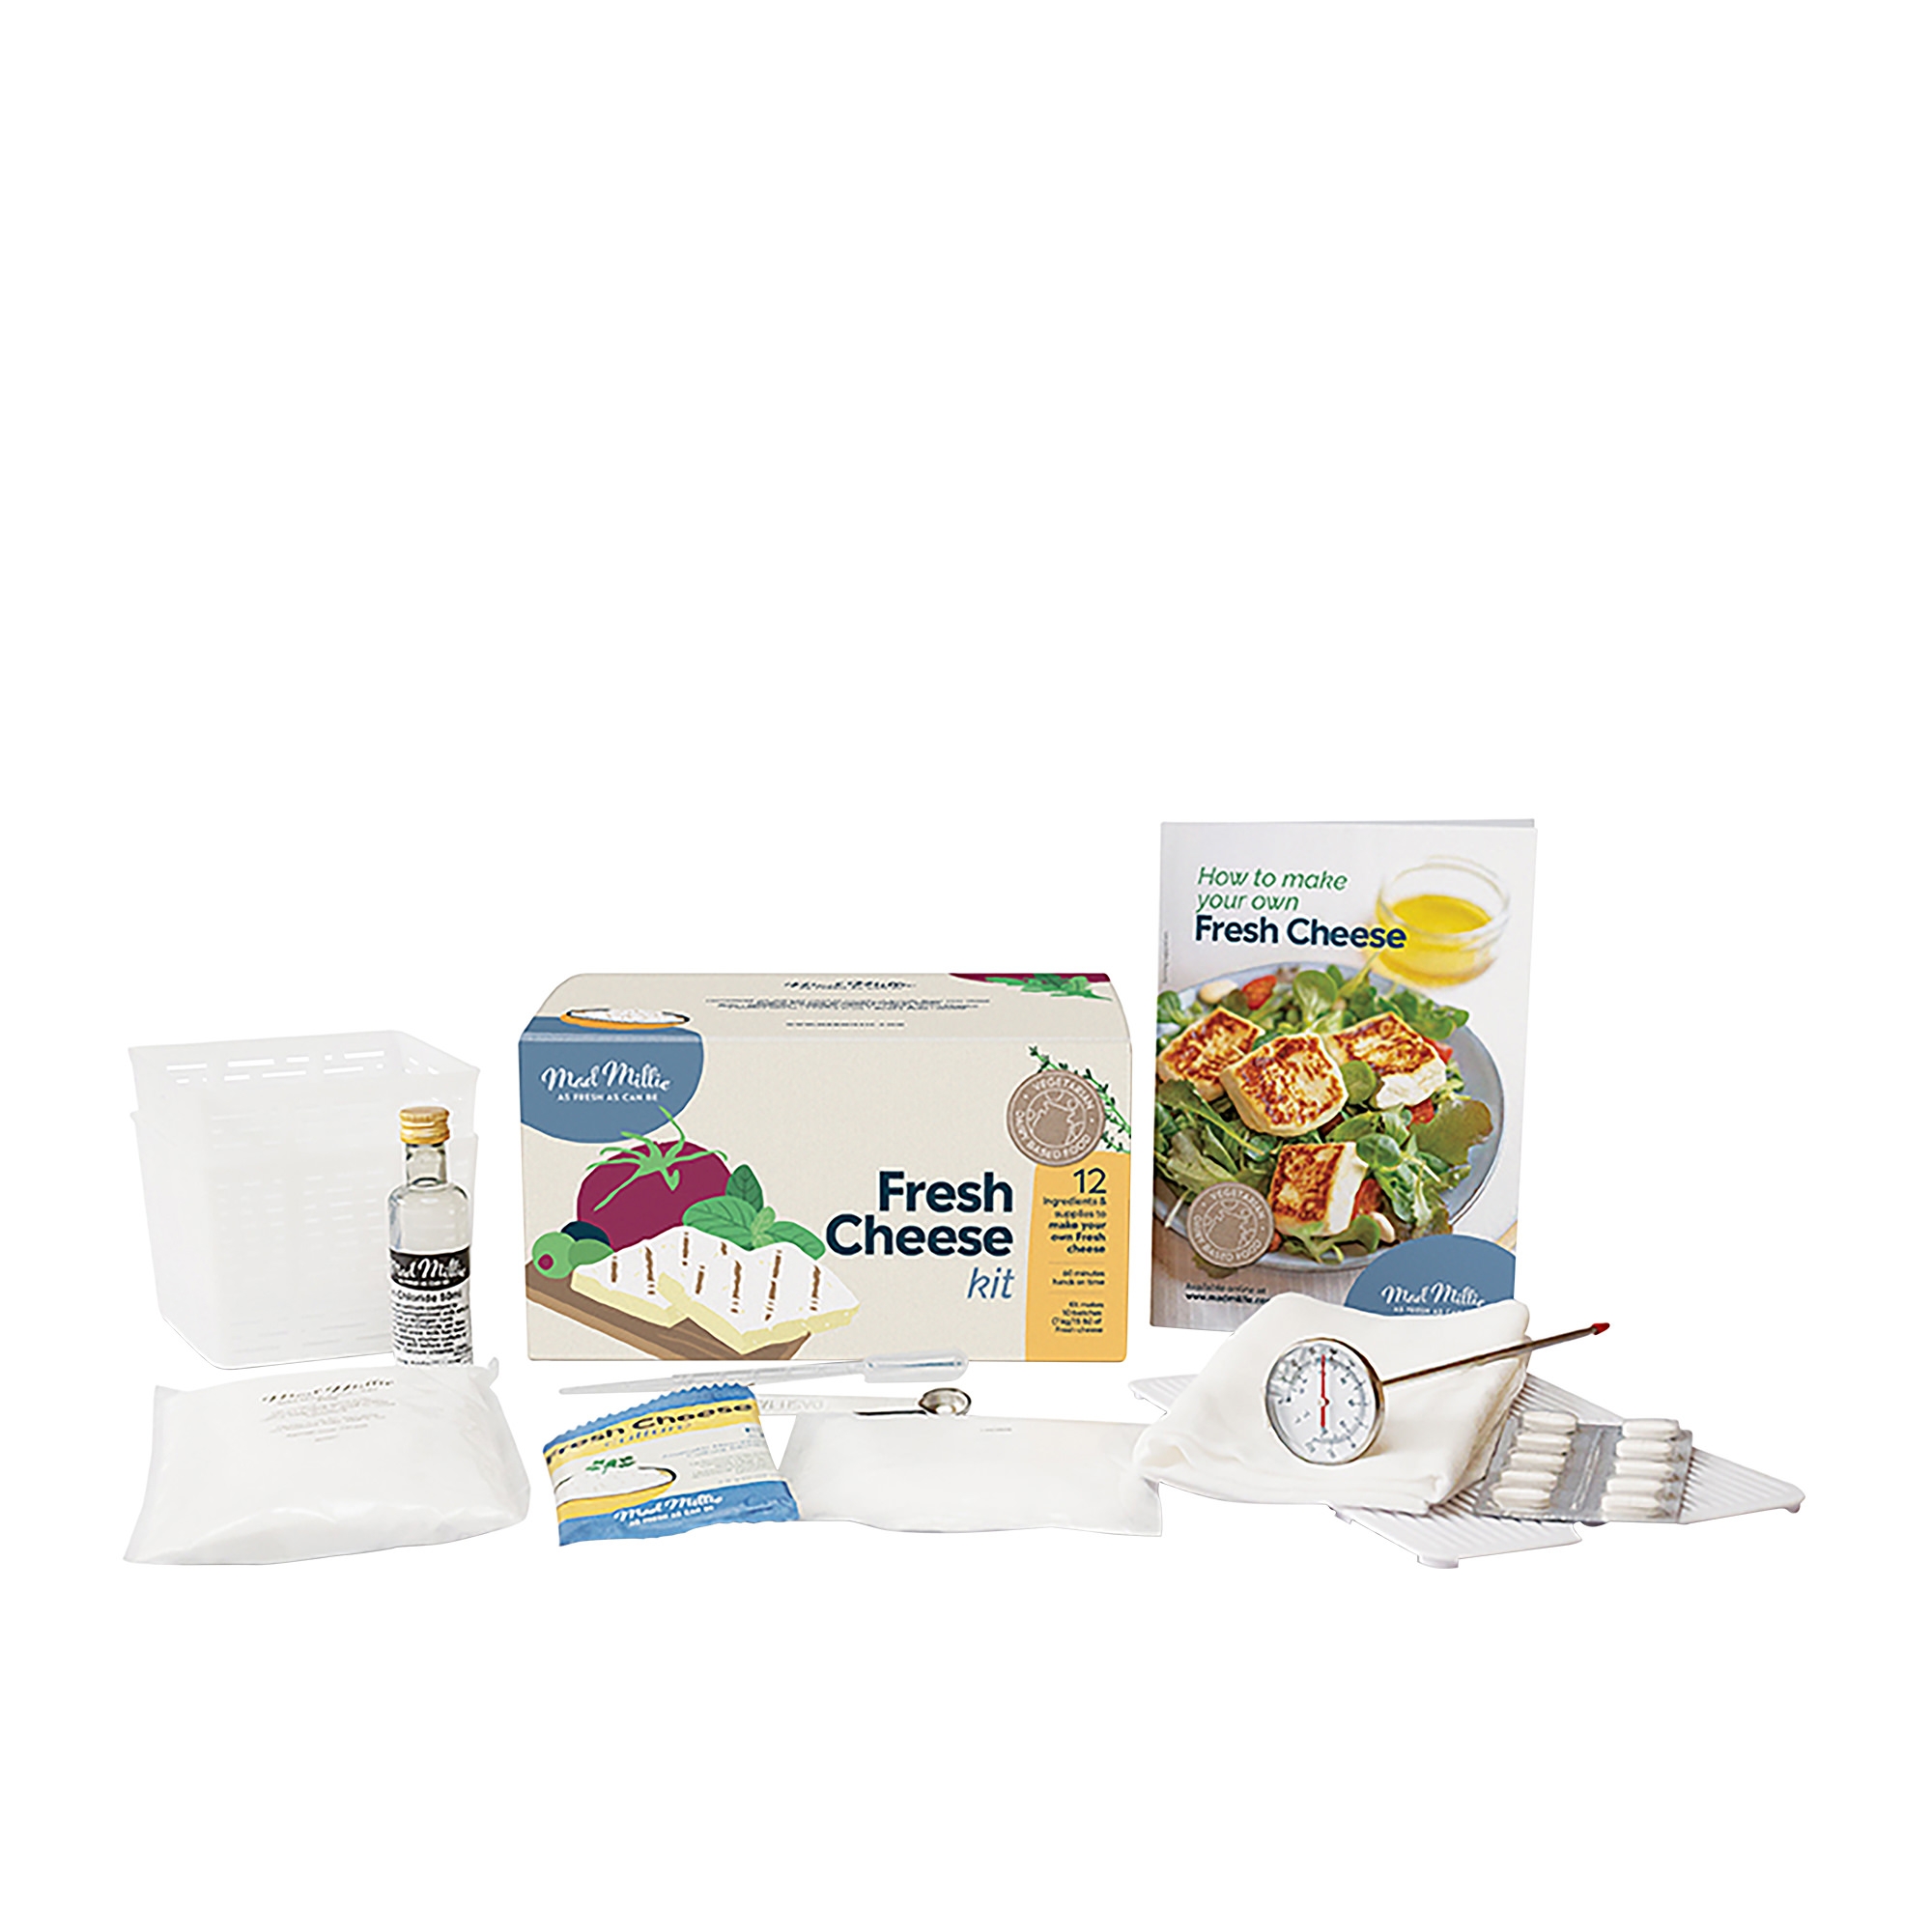 Mad Millie Fresh Cheese Complete Kit Image 1